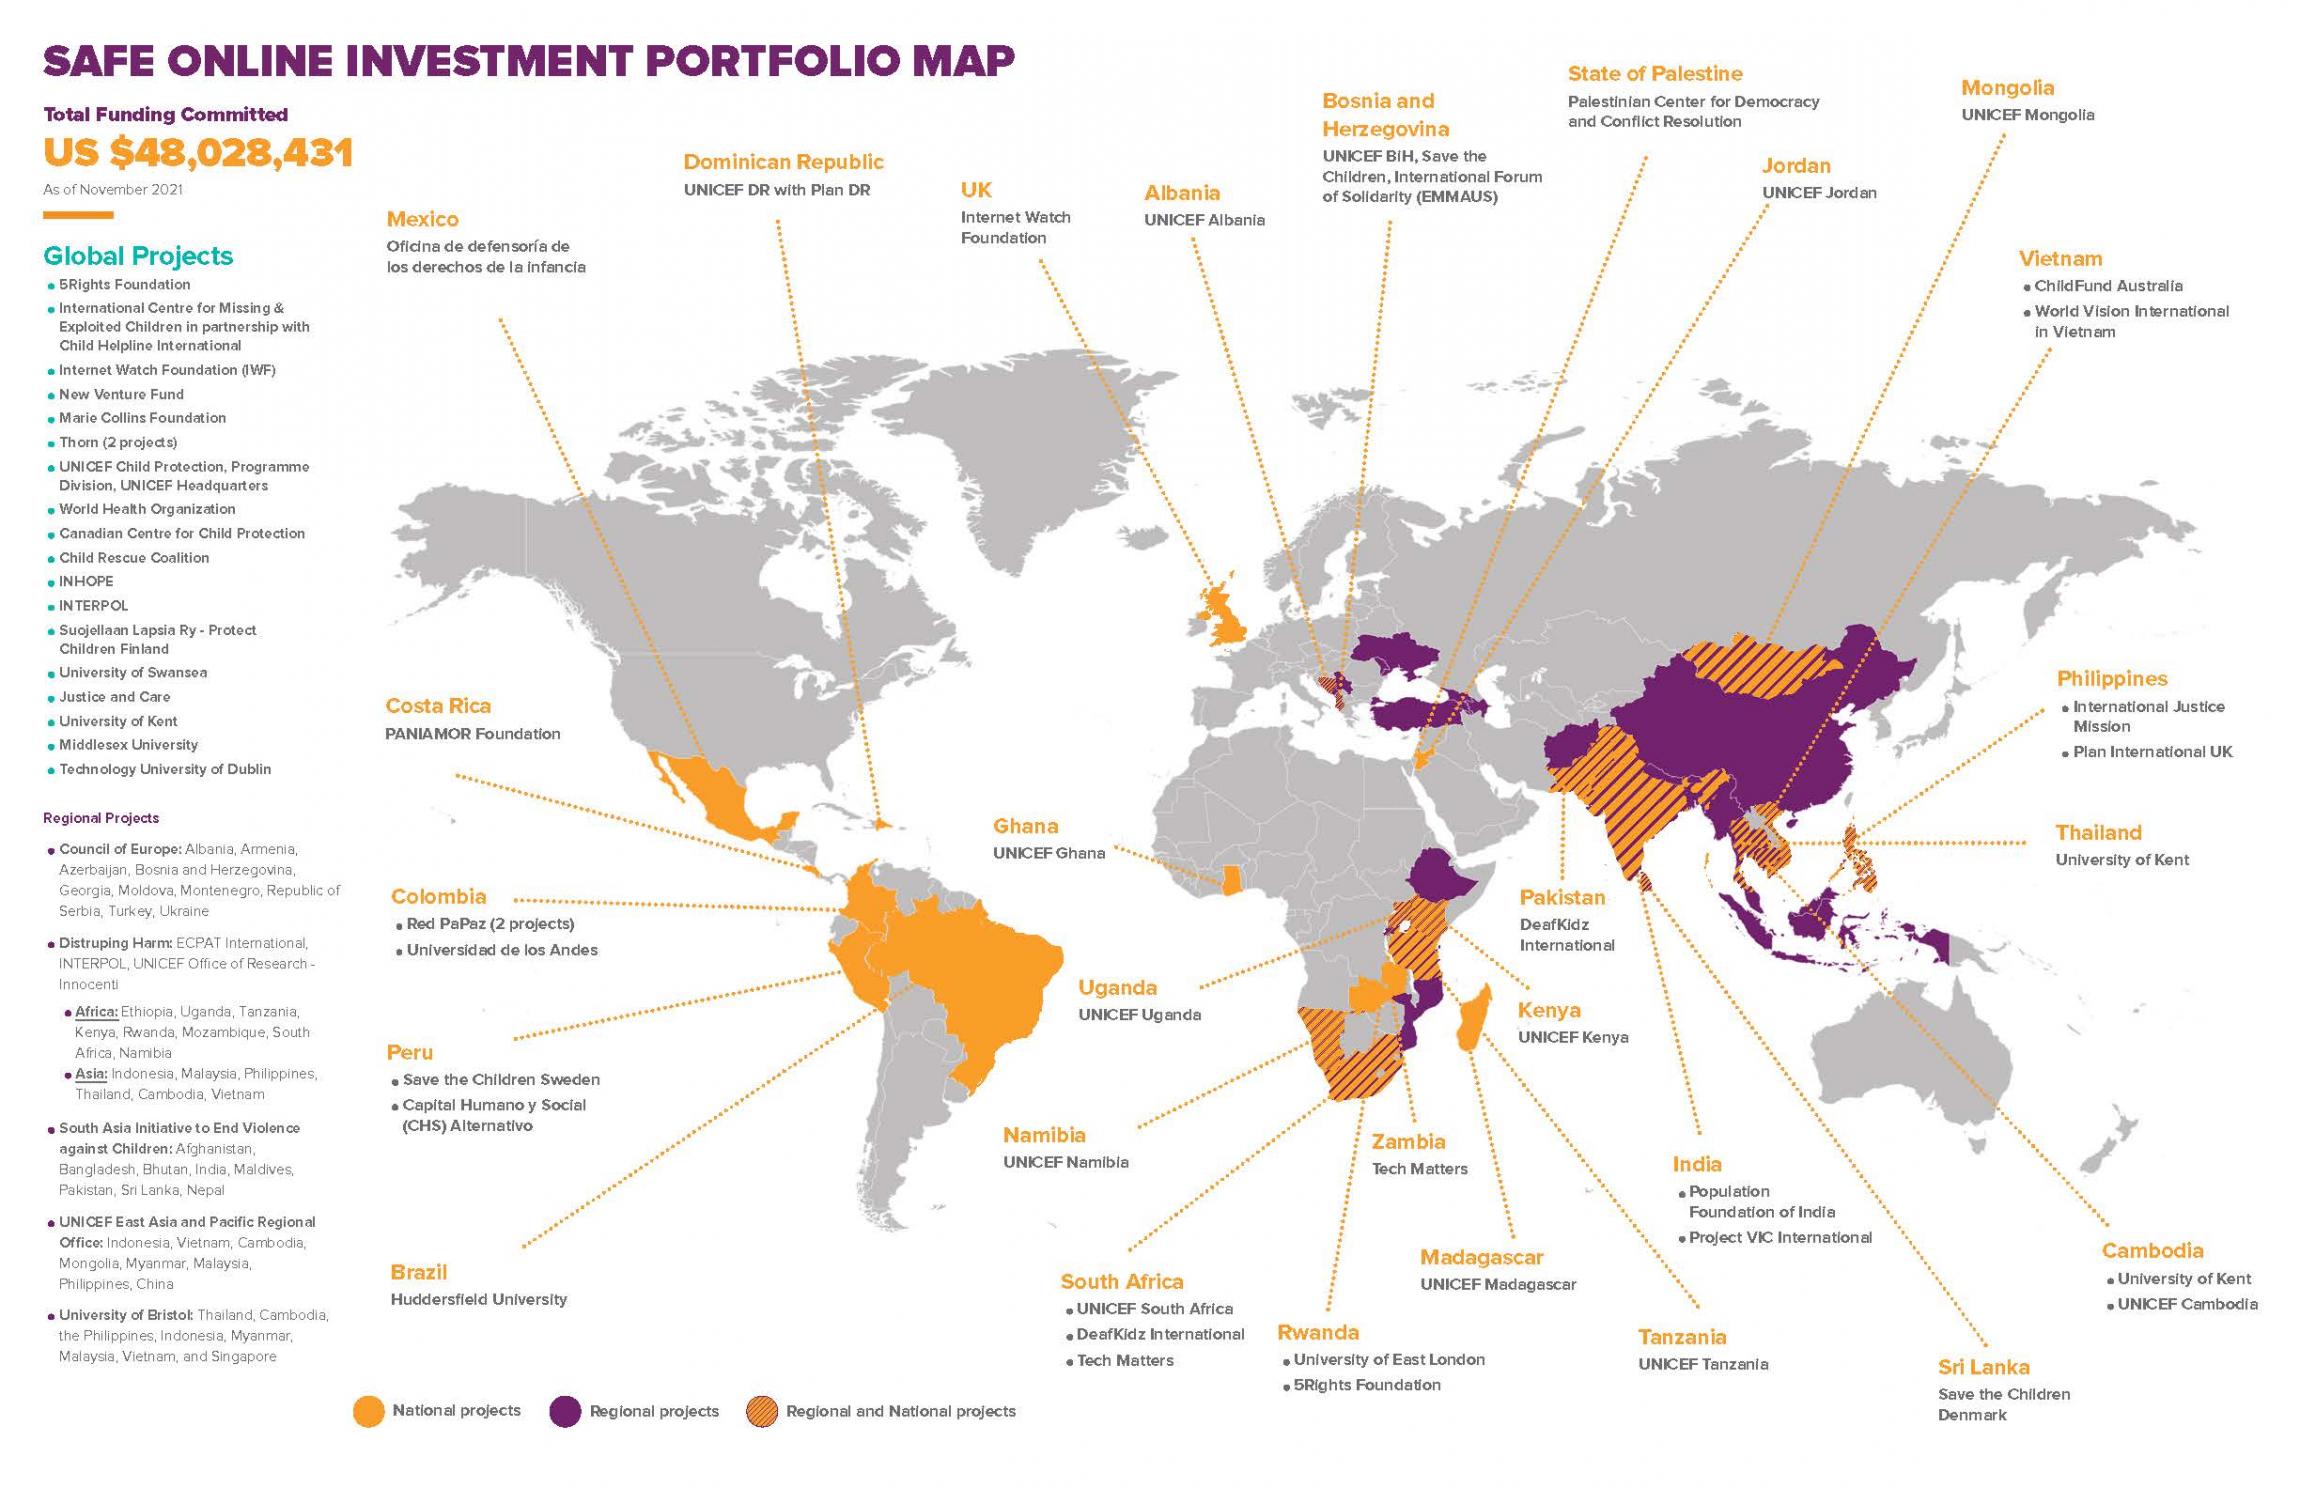 Safe Online Investment Portfolio - Regional projects As of November 2021